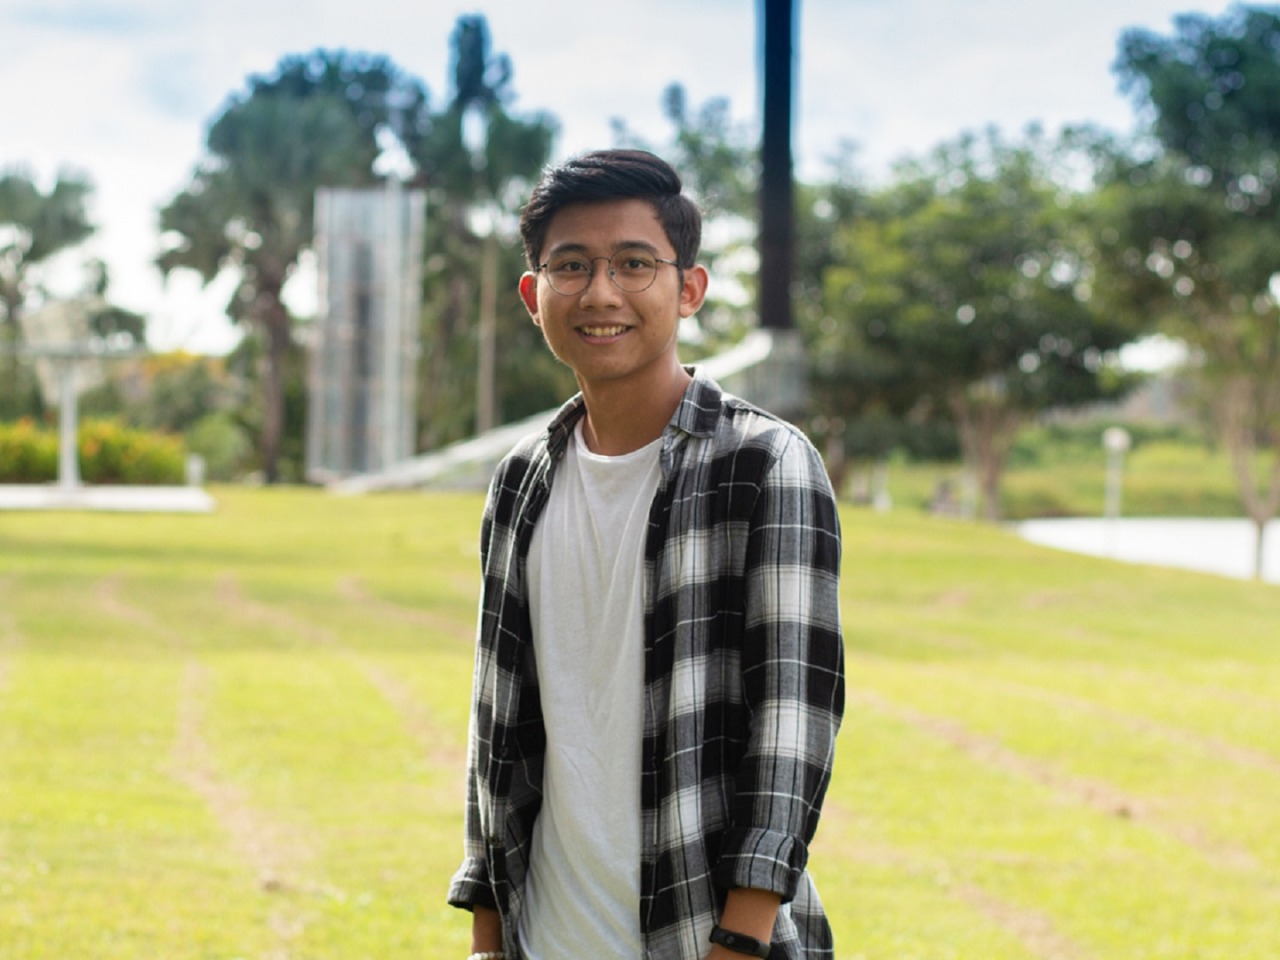 “During my Foundation year, I mainly played football, joining our internal leagues, the Curtin Cup and also represented Curtin Malaysia in matches. I was already involved in our Indonesian students’ society on campus called Persatuan Pelajar...